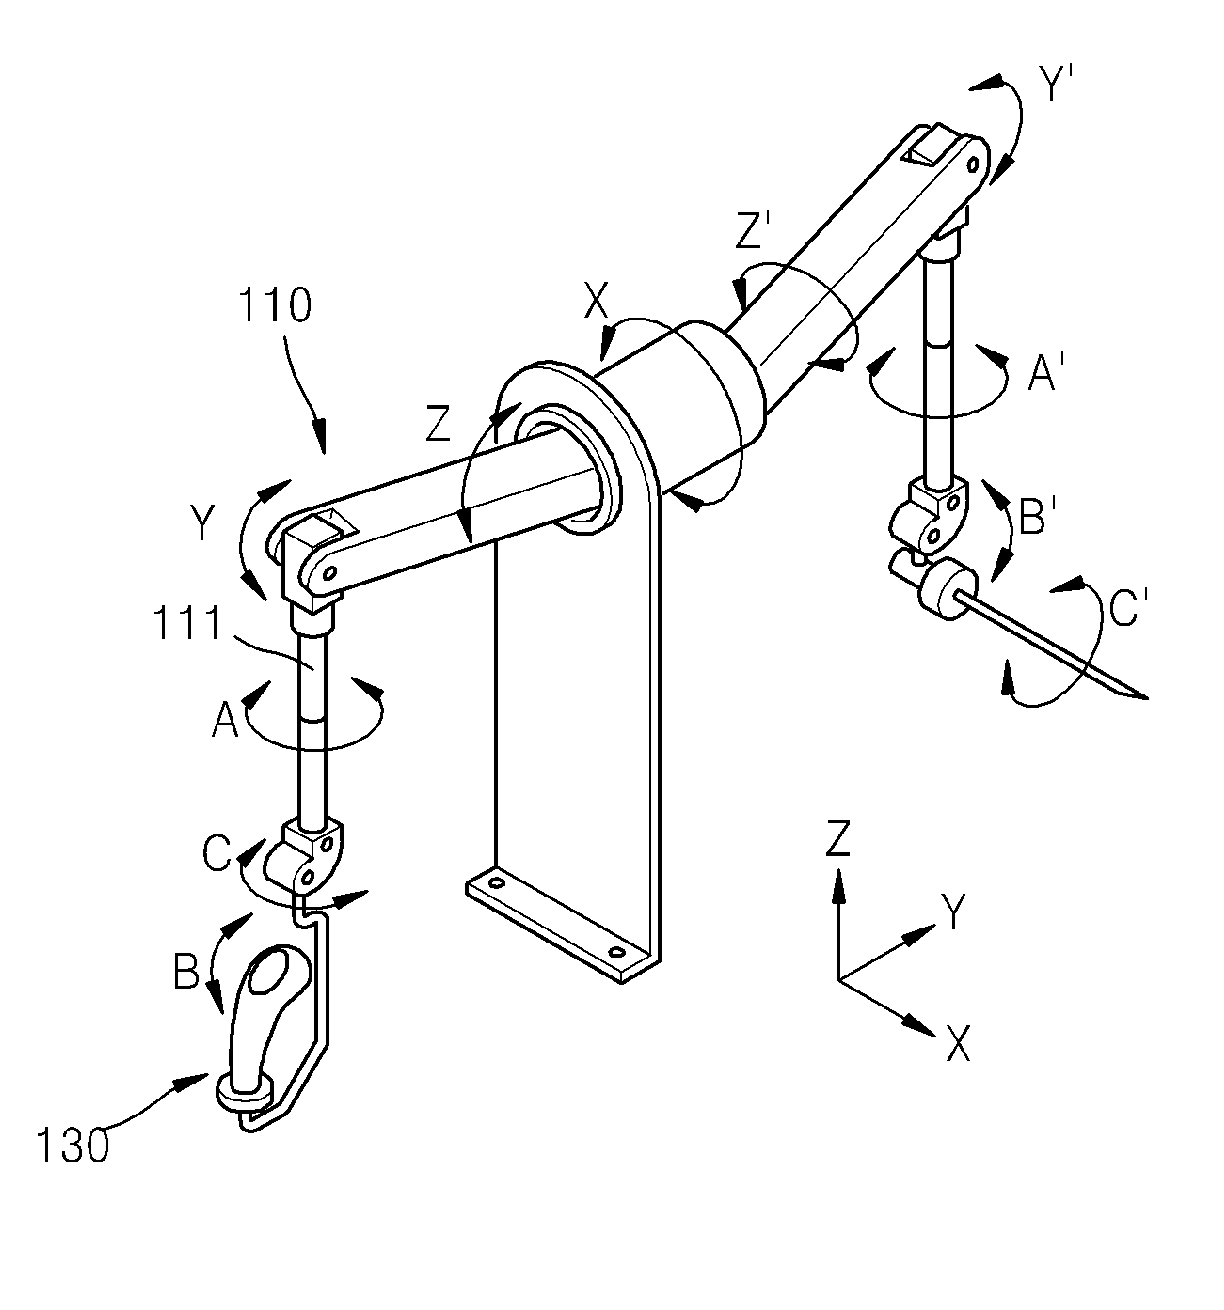 Apparatus for surgery